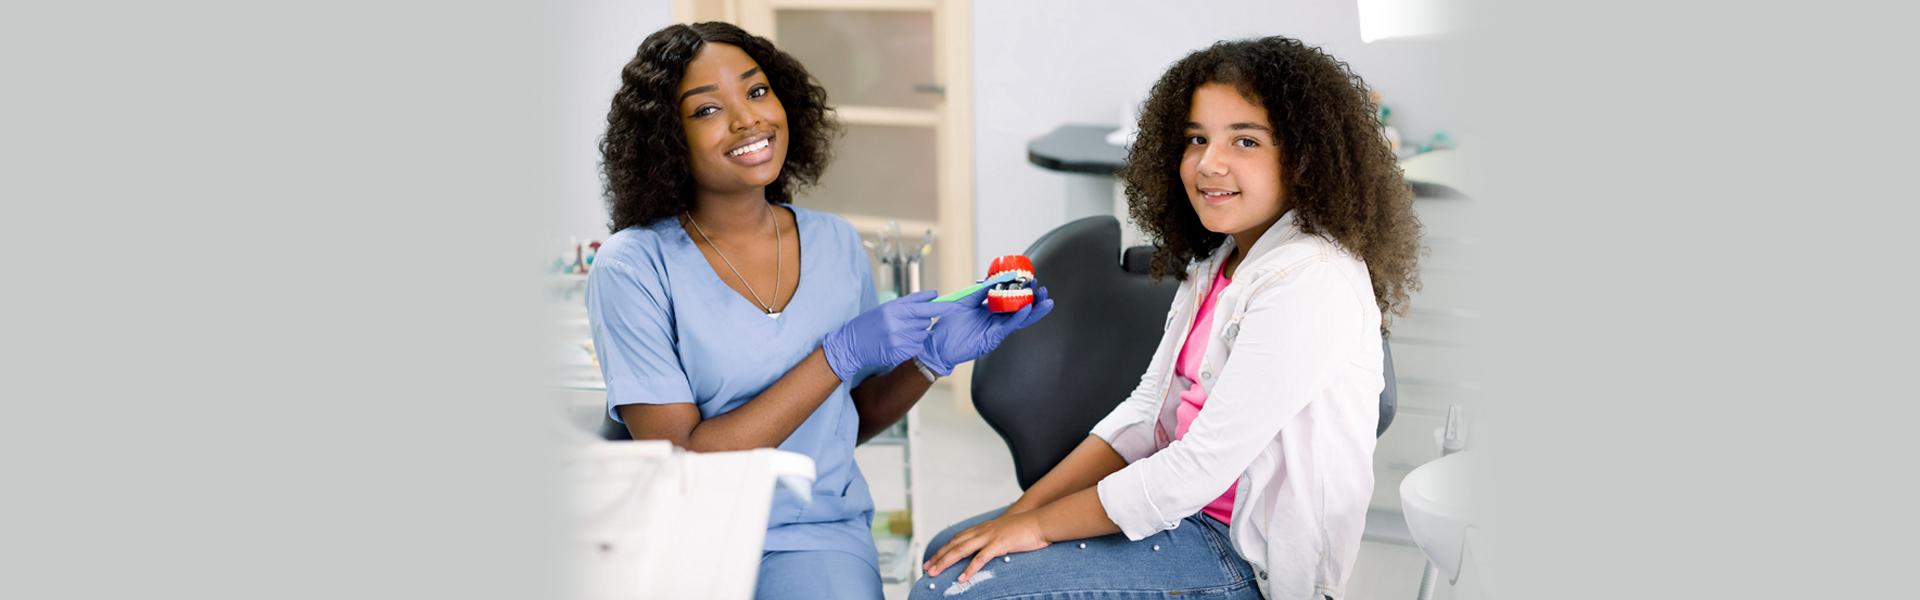 What Procedures Are Done in Pediatric Dentistry?